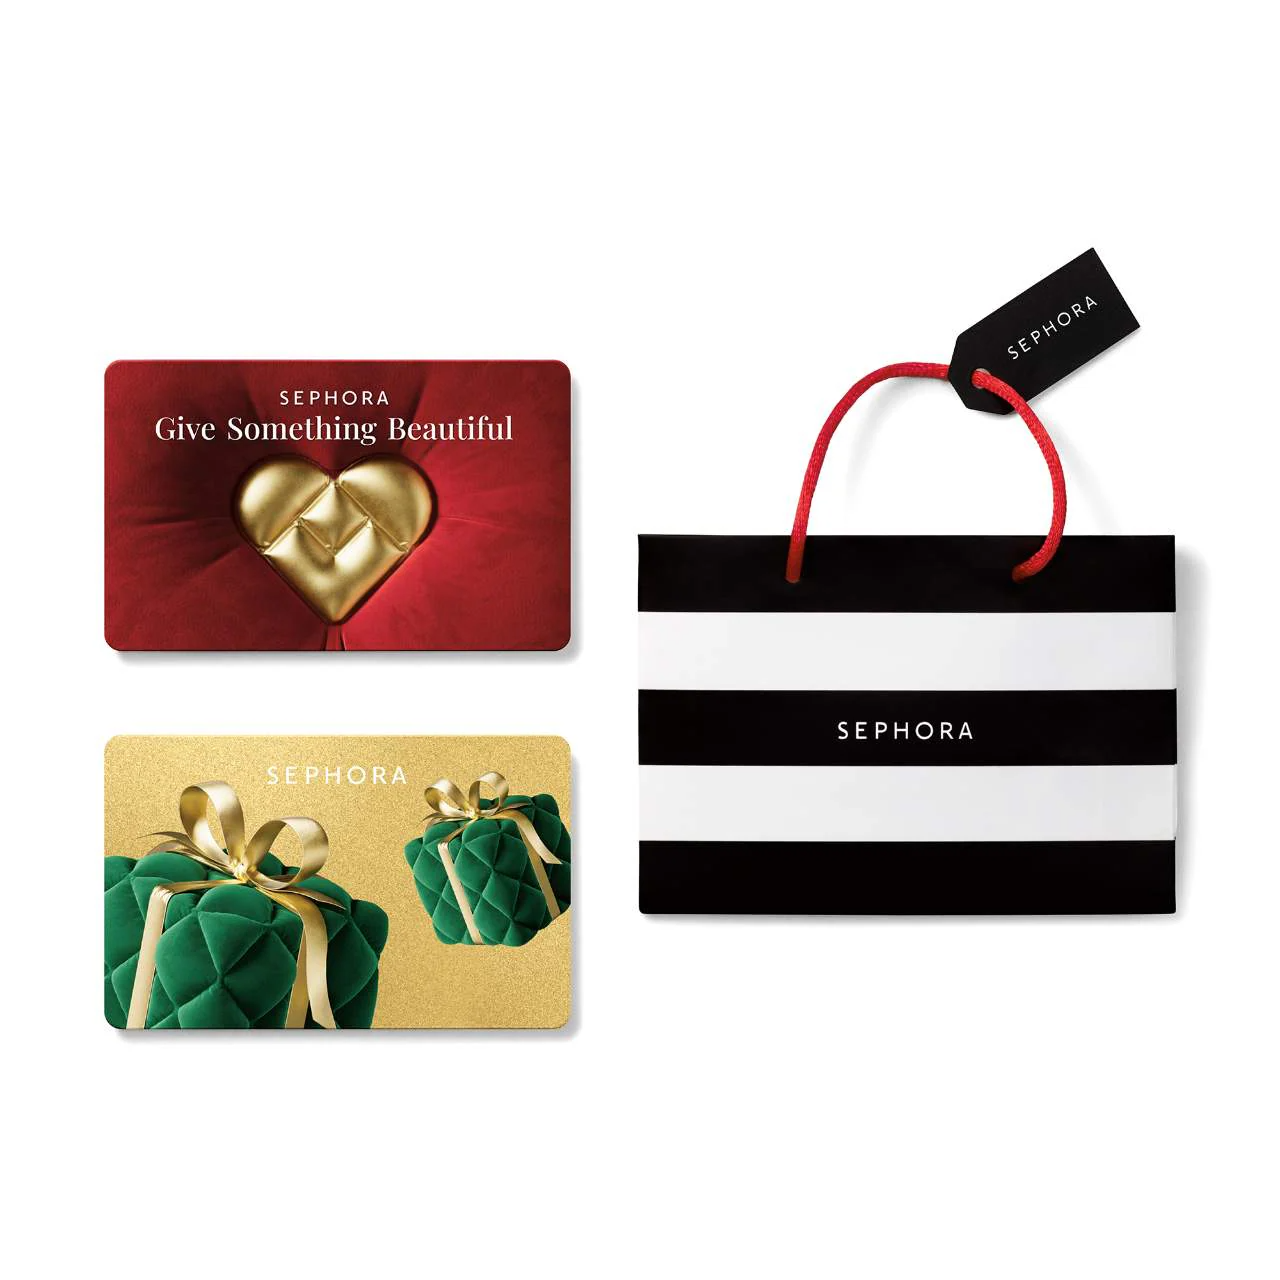 SEPHORA - Gifting Made Easy - Buy Gift Cards, Experience Gifts, Flowers,  Hampers Online in Singapore - Giftano